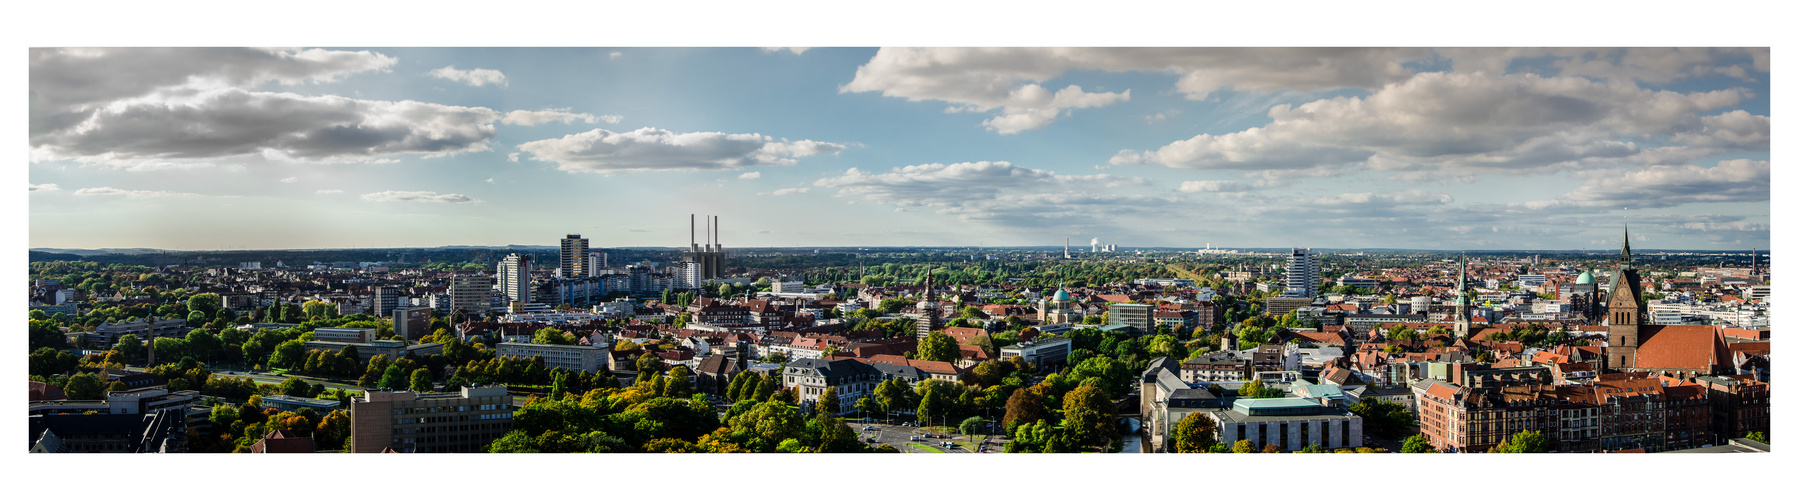 Panorama Hannover